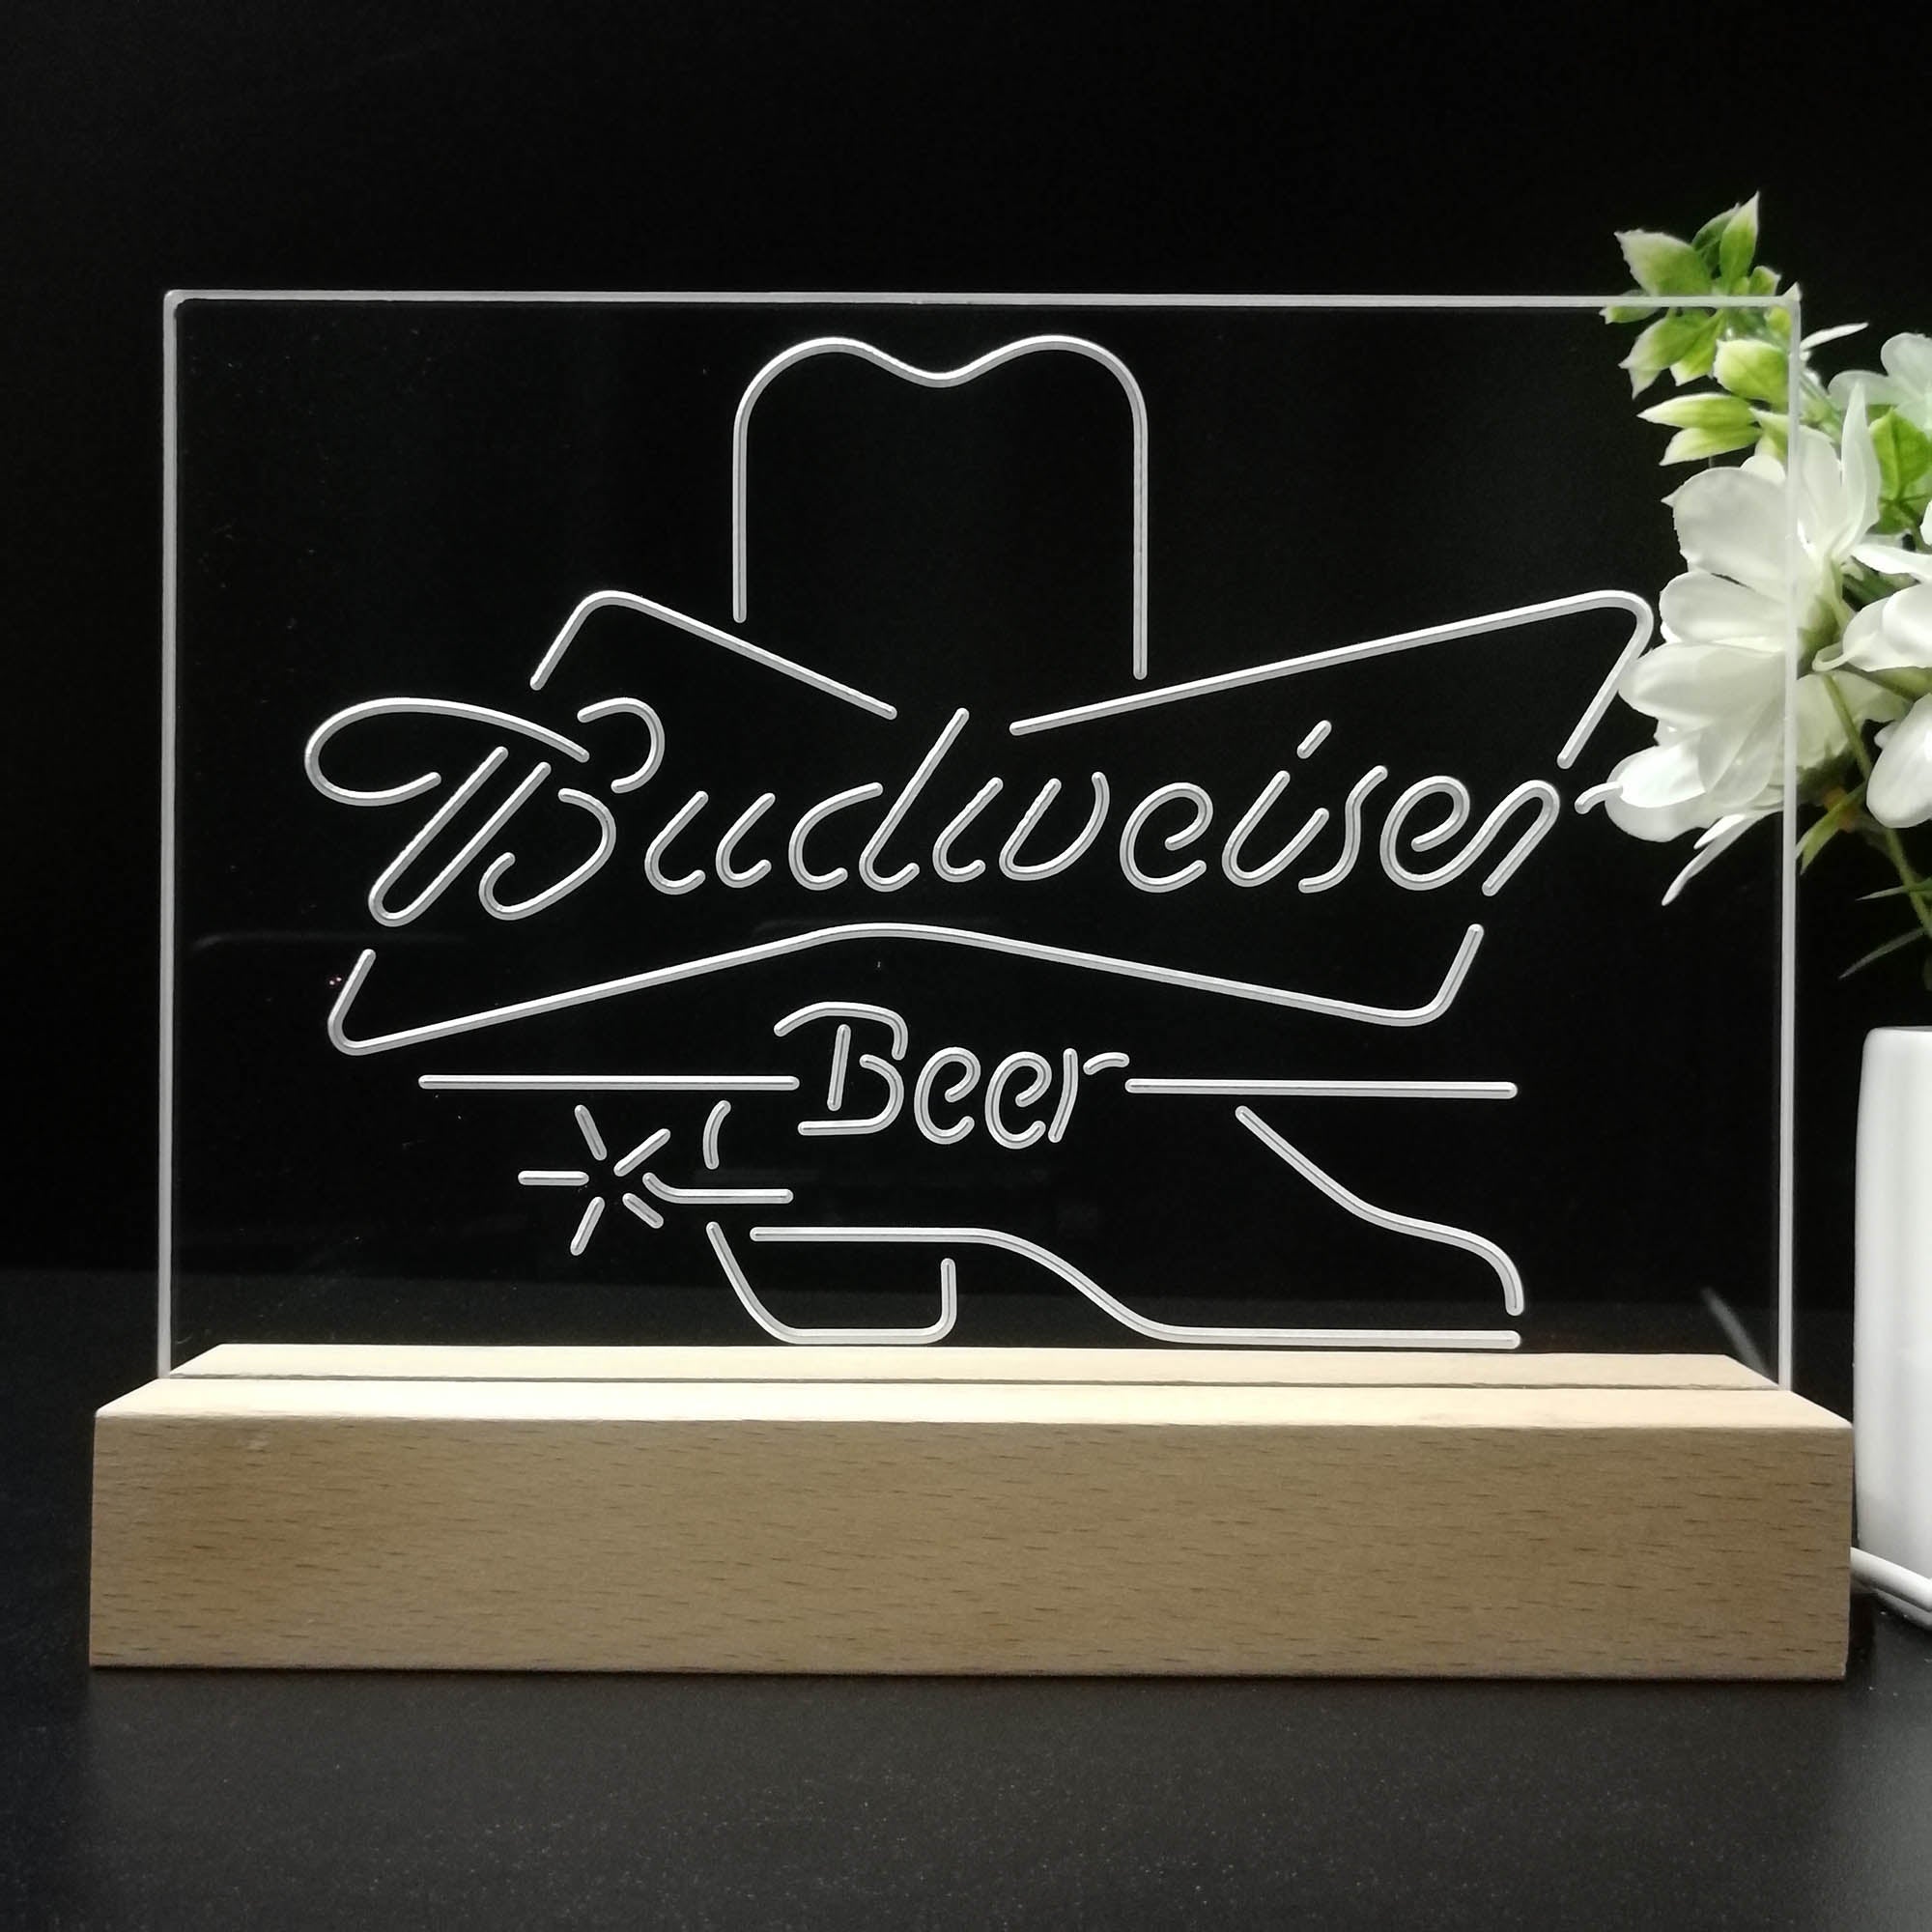 Budweisers Cowboys Boot Home Beer Bar Decoration Gifts Night Light LED Sign